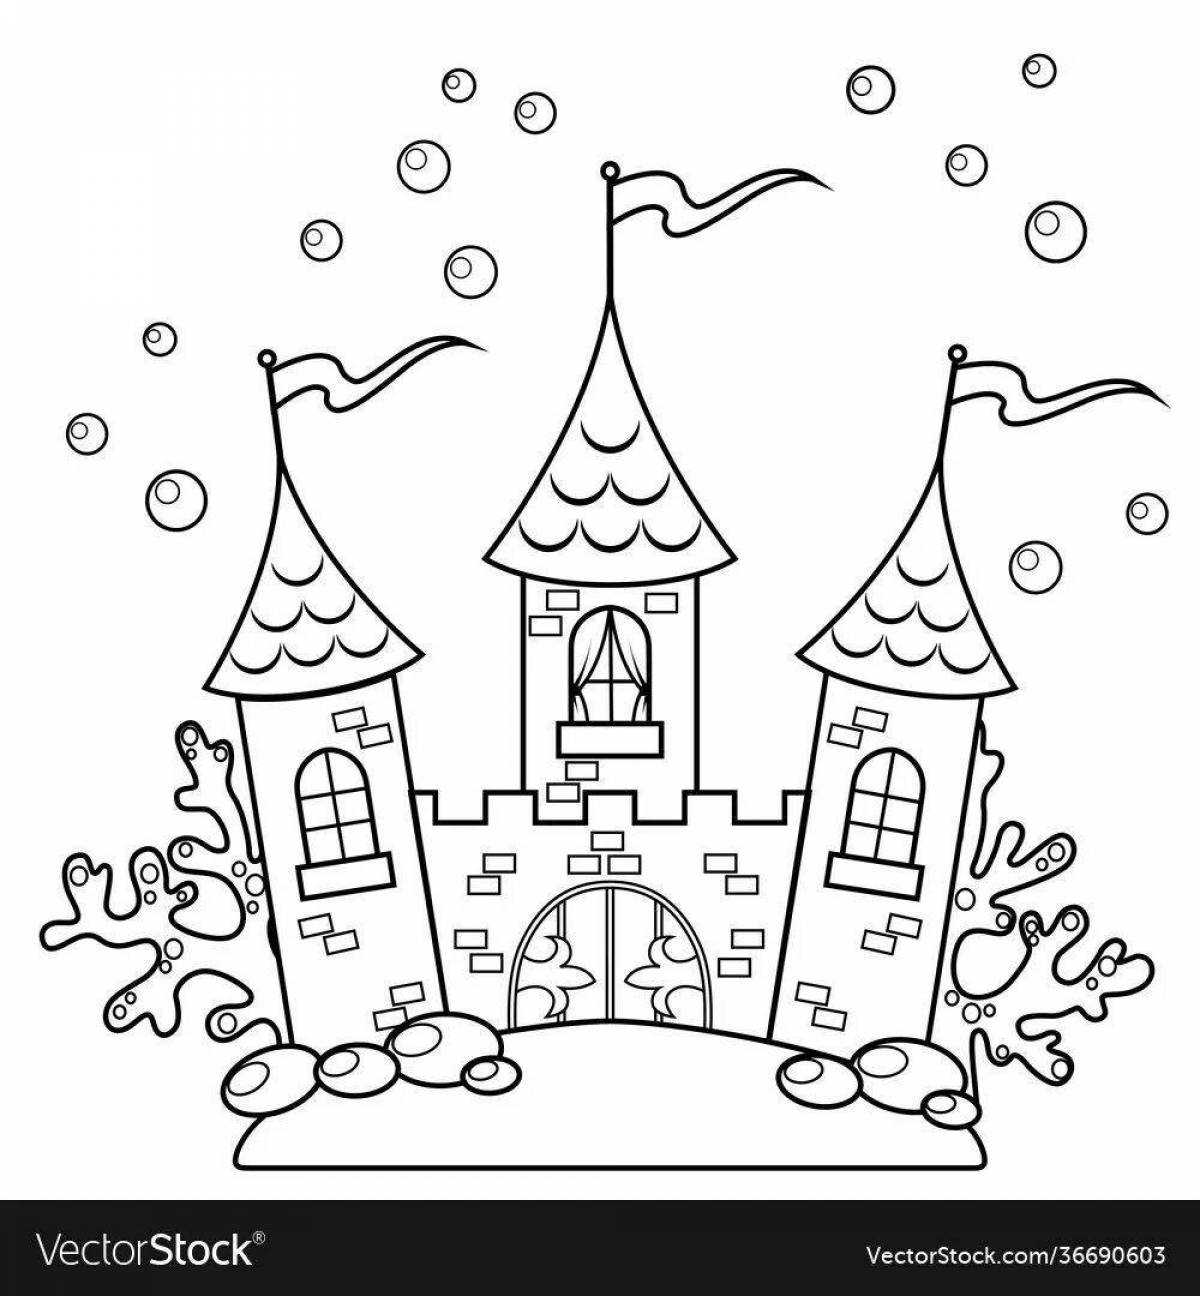 Coloring book immaculate magic castle